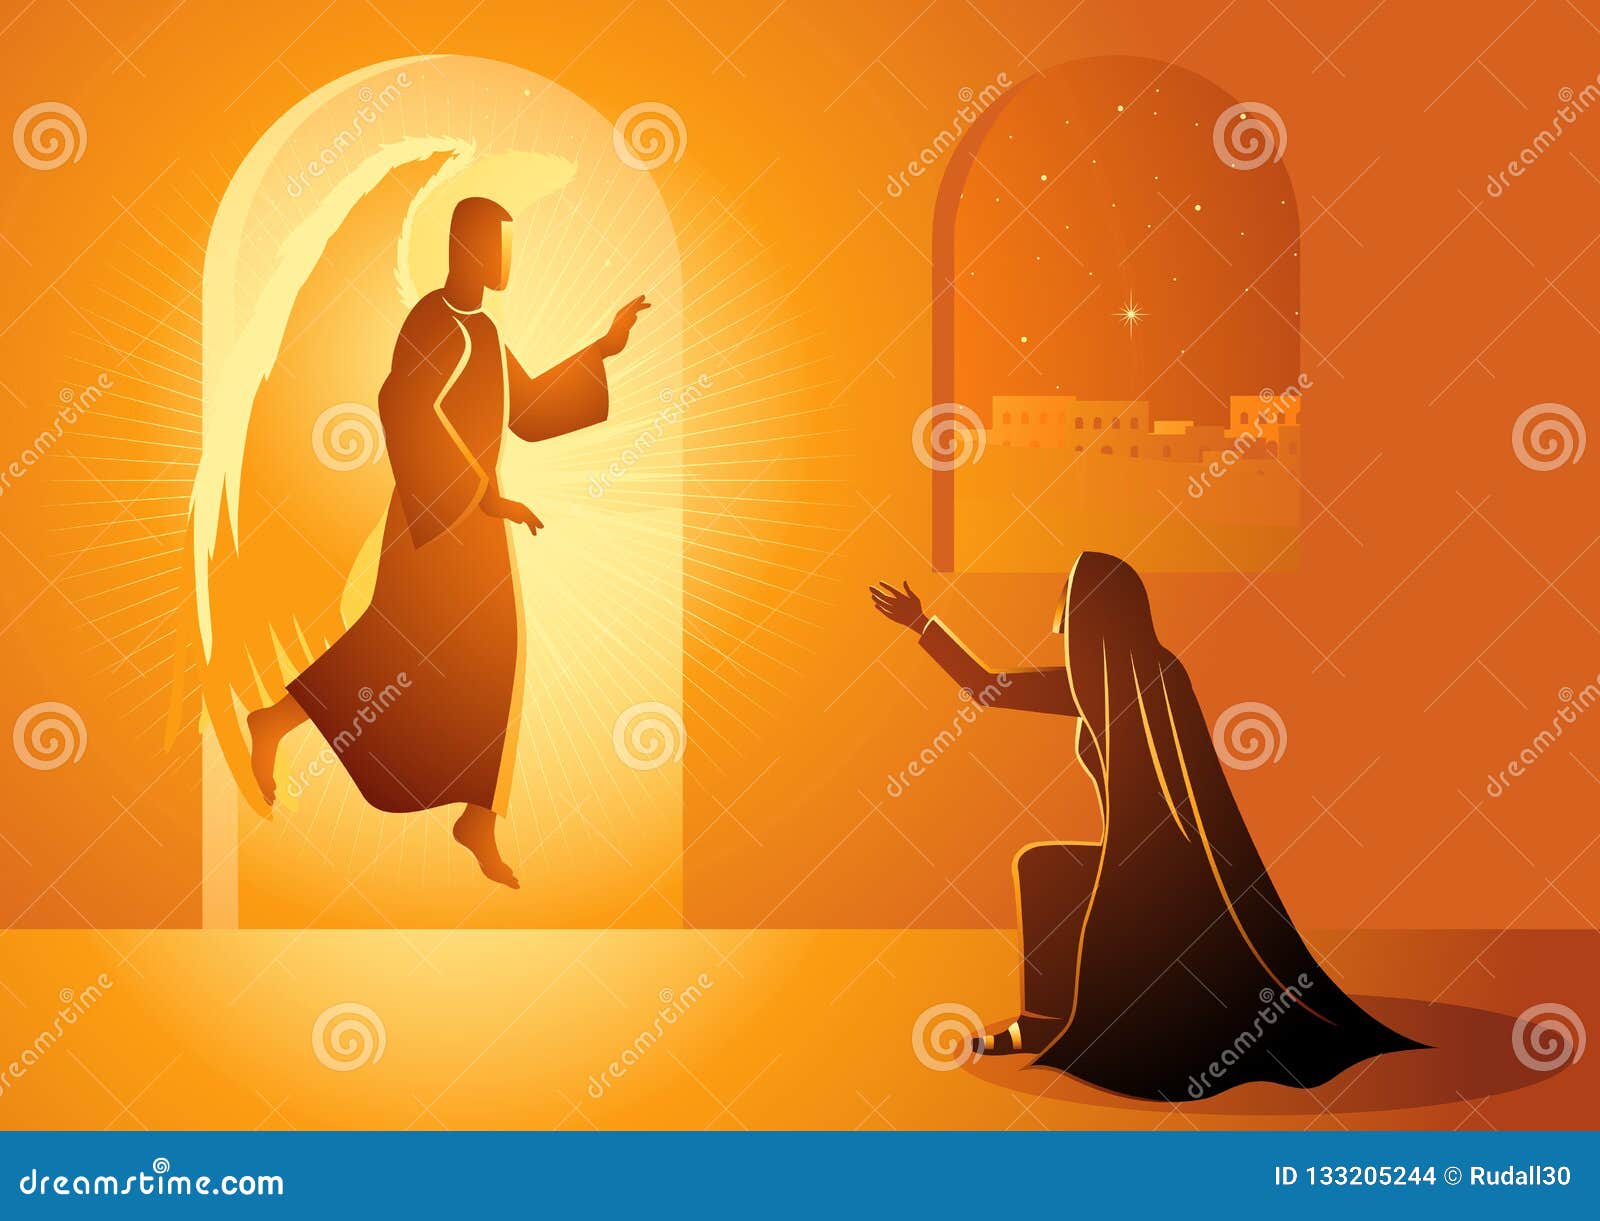 annunciation to the blessed virgin mary